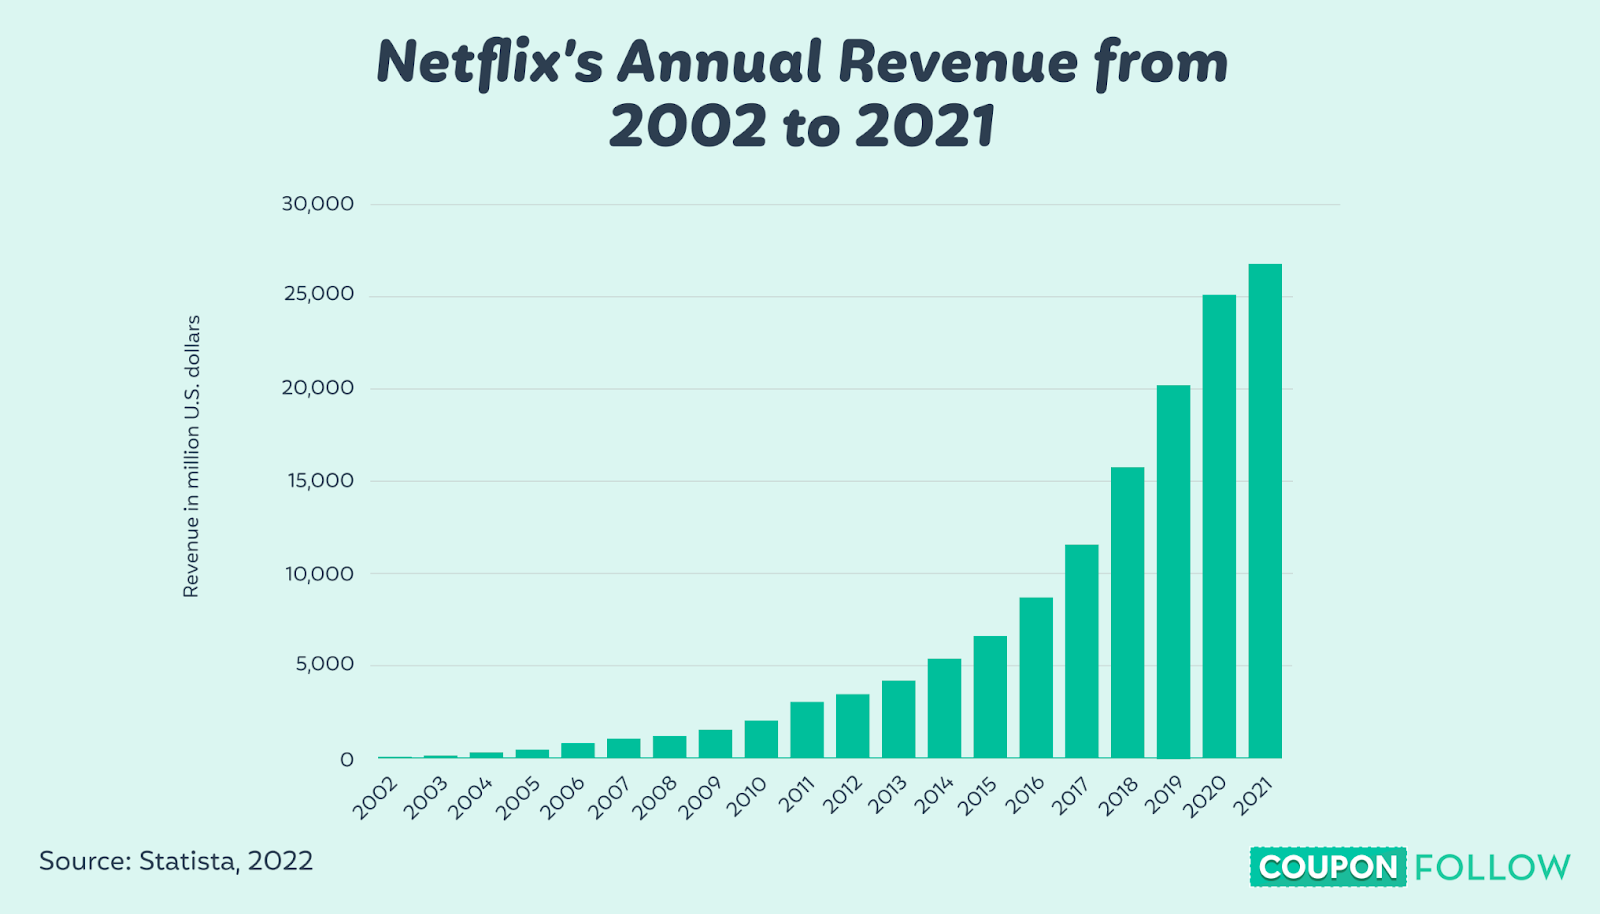  graph depicting netflix’s annual revenue from 2002 to 2021